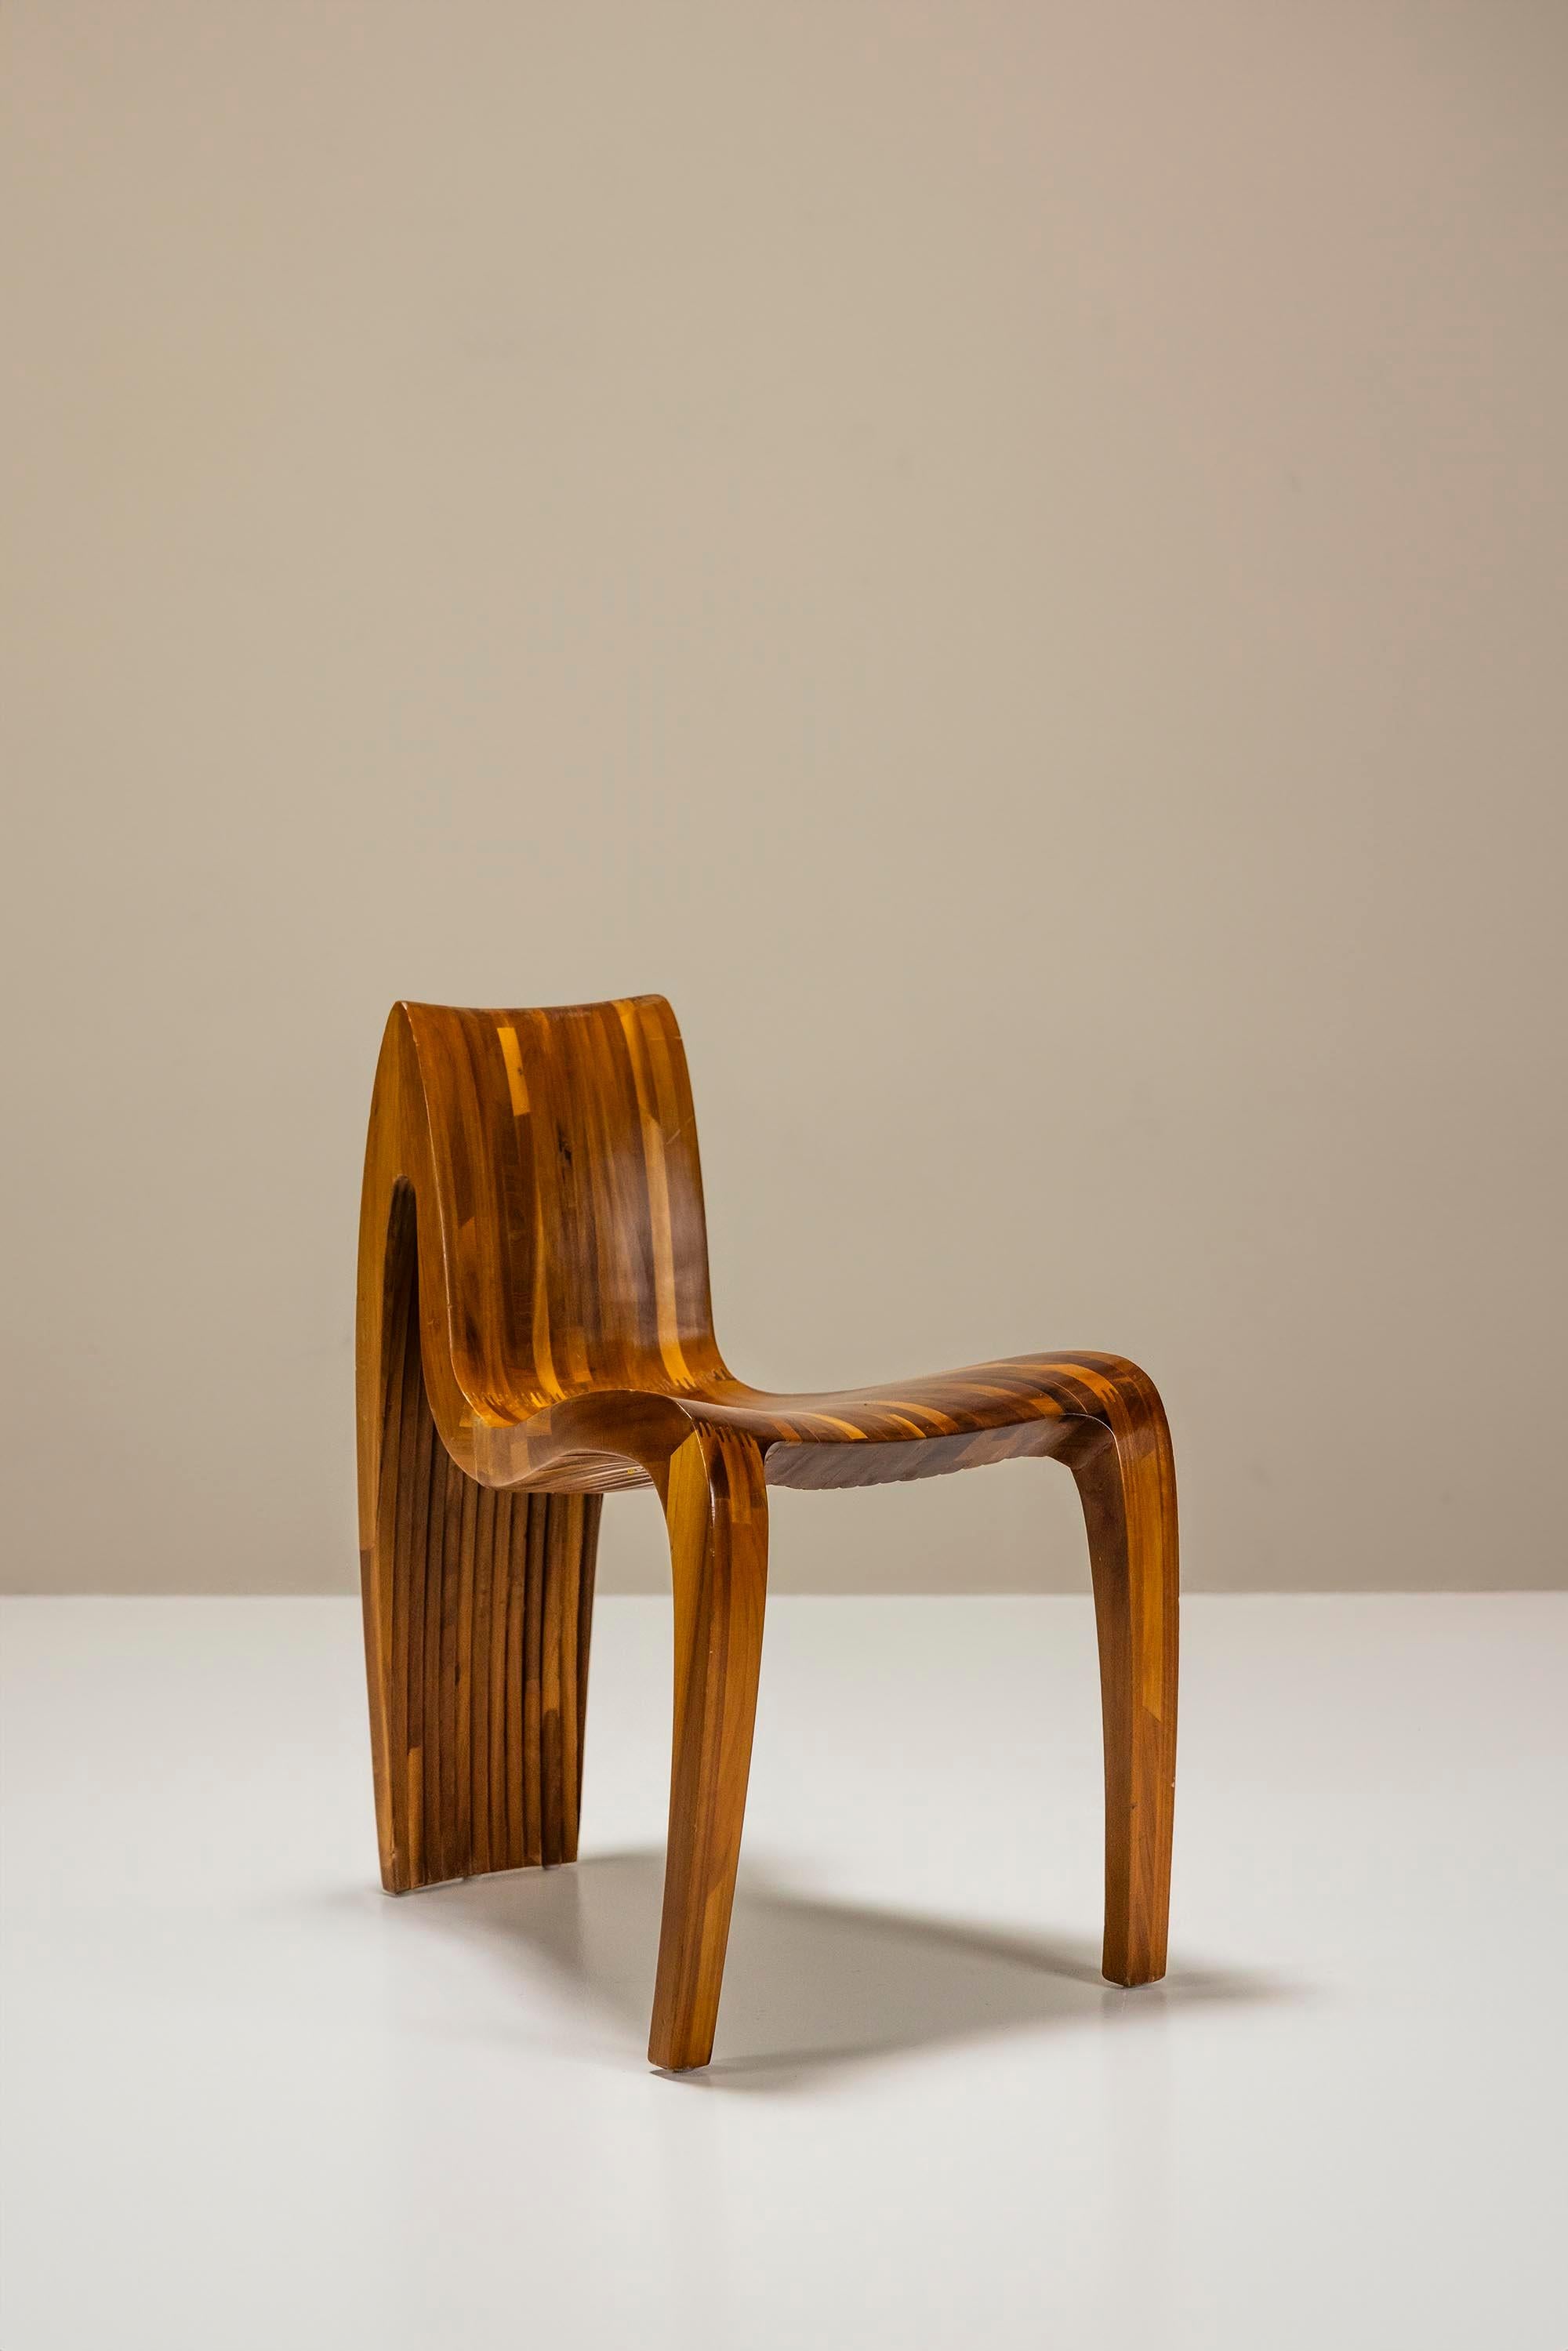 Dynamic Three-Legged Side Chair In Wood in the style of Polyte Solet, France 1